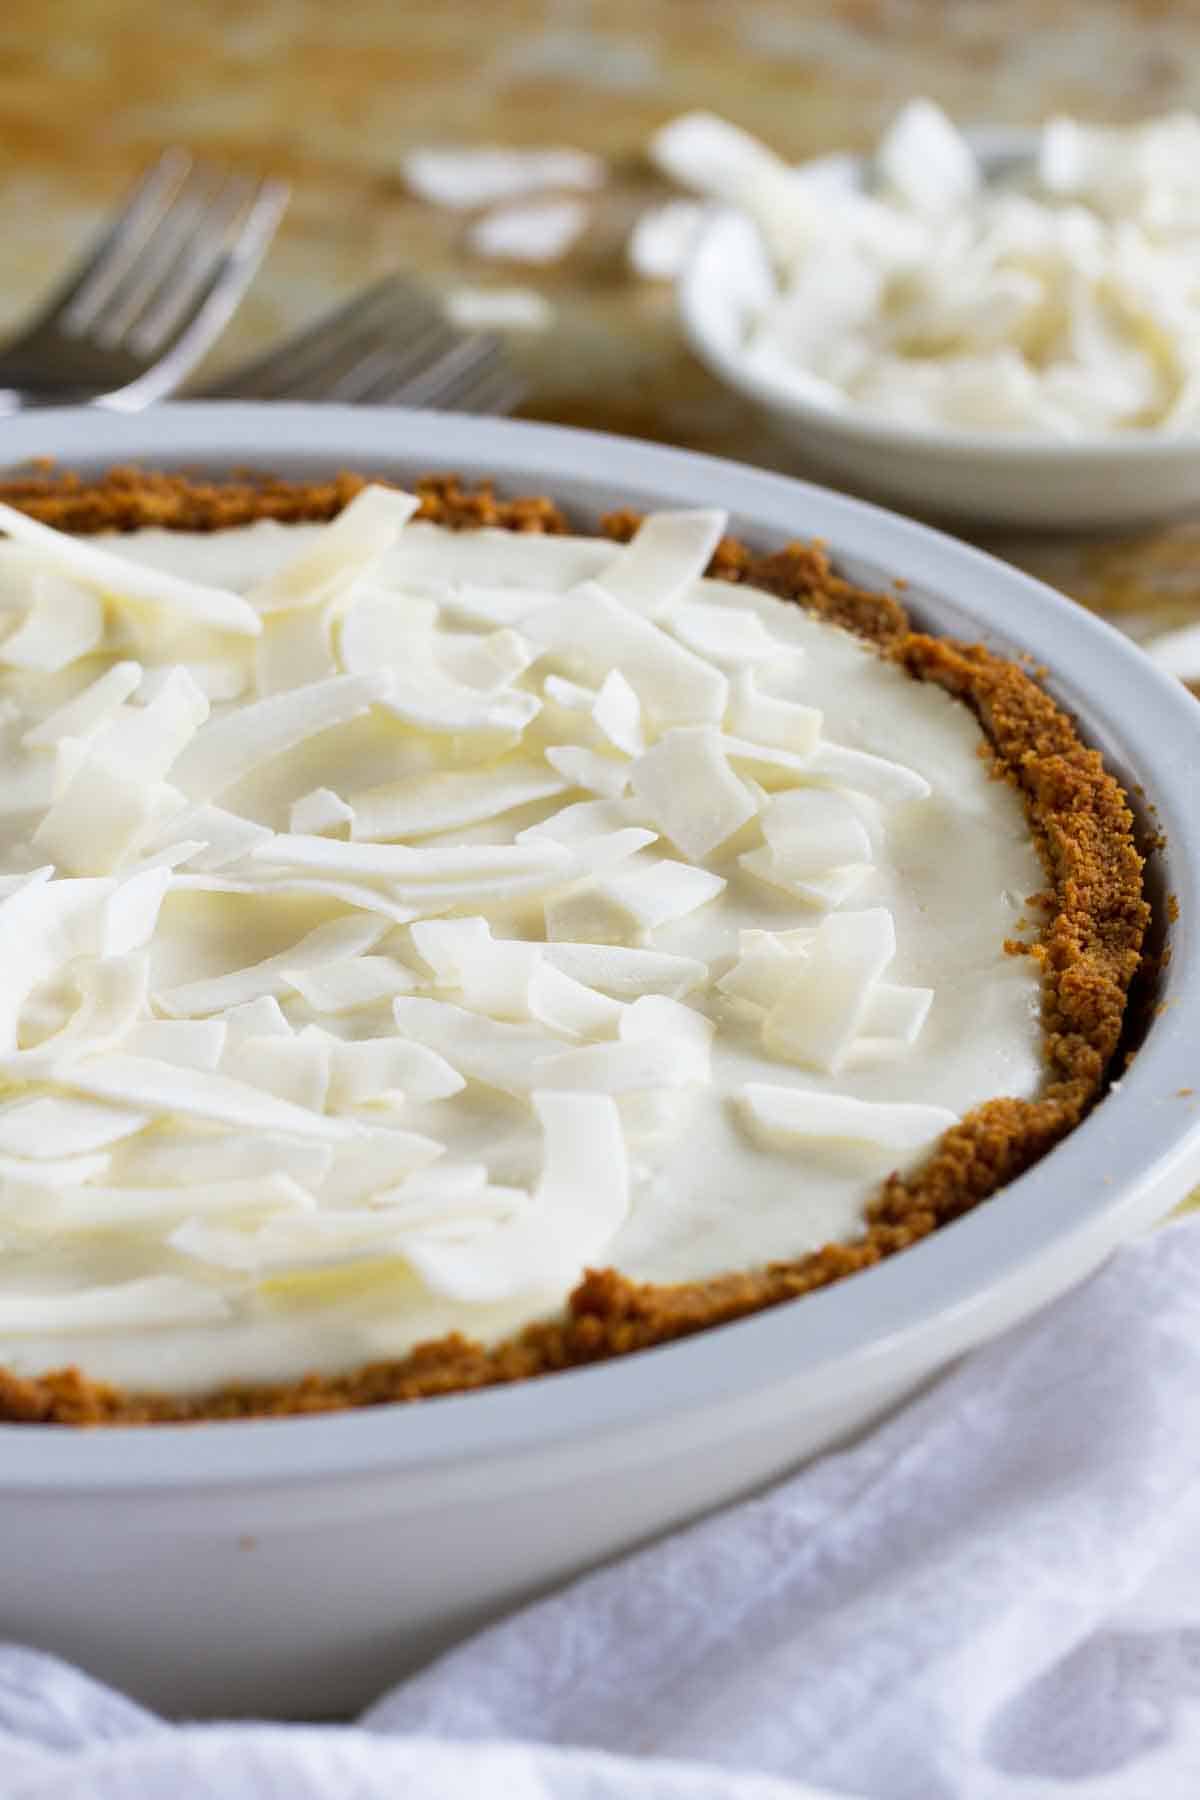 Coconut Cheesecake Pie topped with large pieces of shredded coconut.